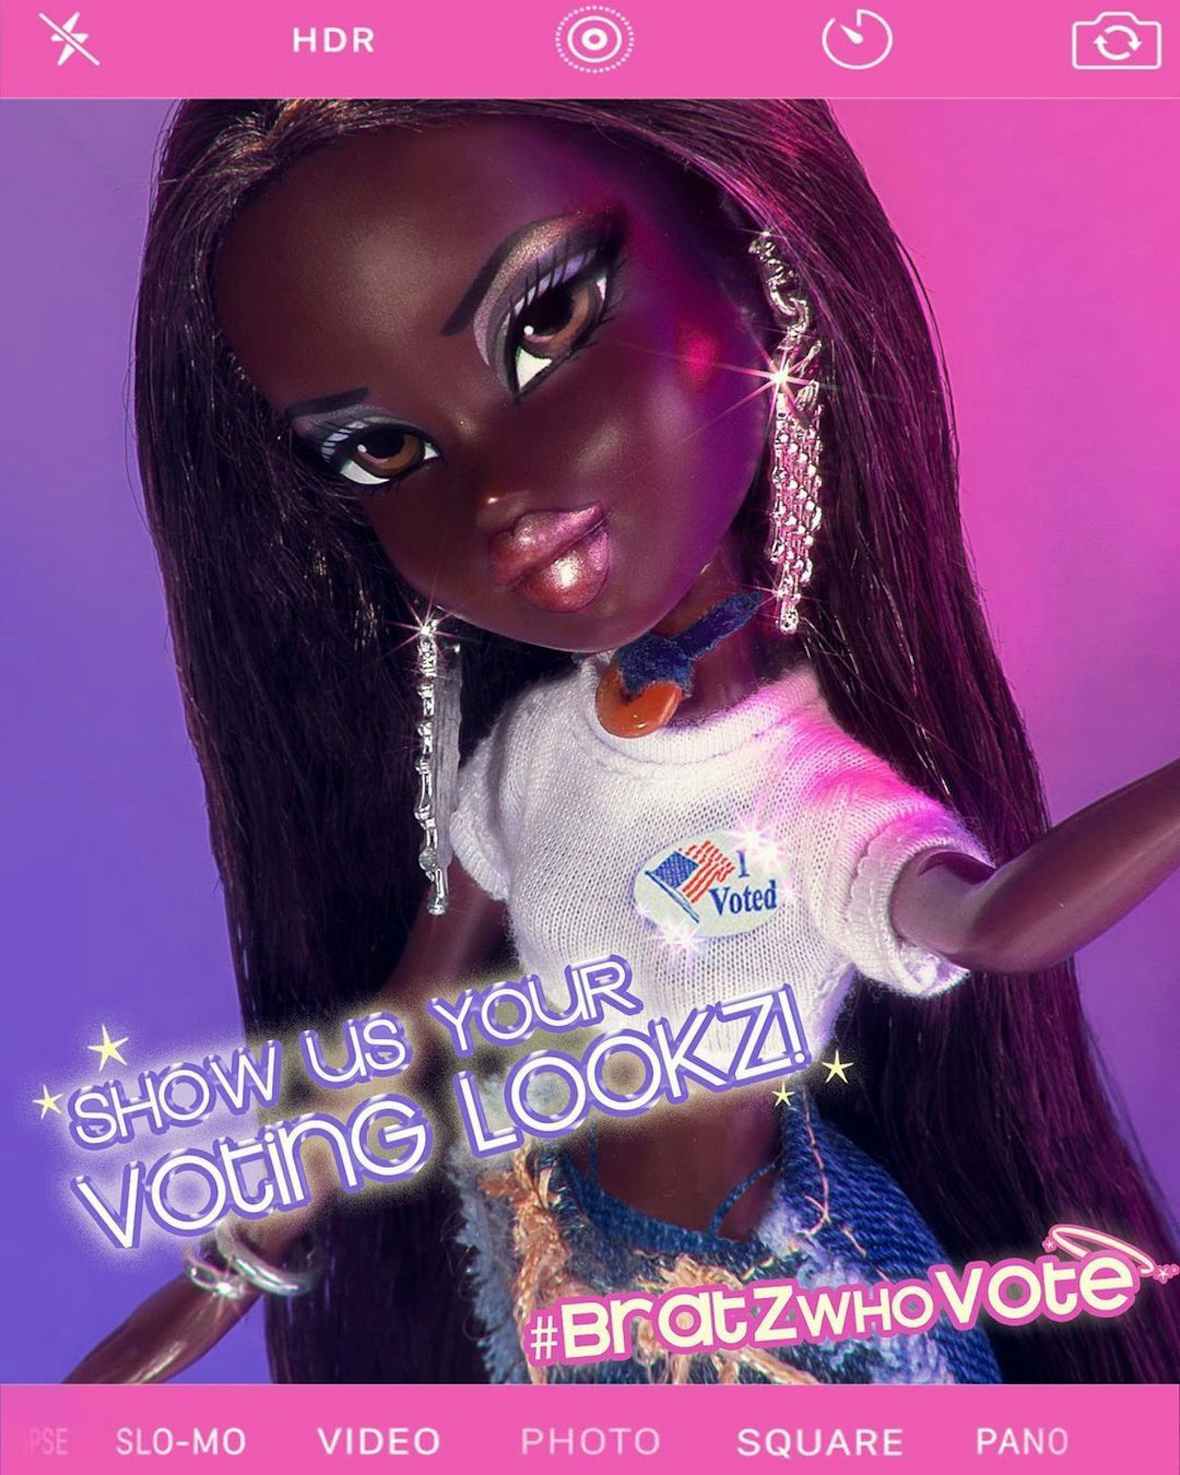 Could Bratz® influence the election? - The Face